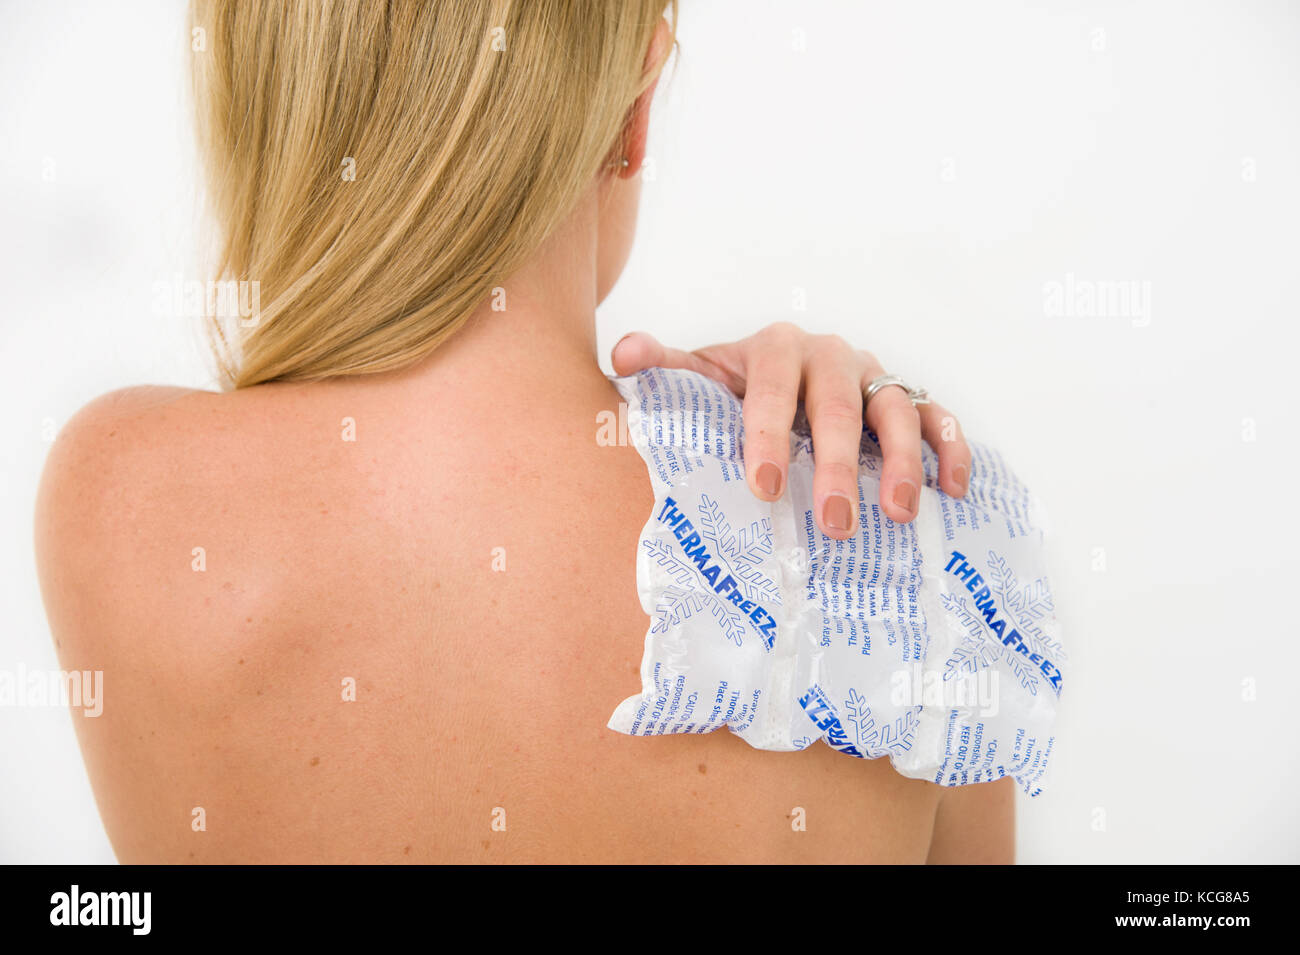 Female holding a Thermafreeze Ice Pack on her Shoulder and back Stock Photo